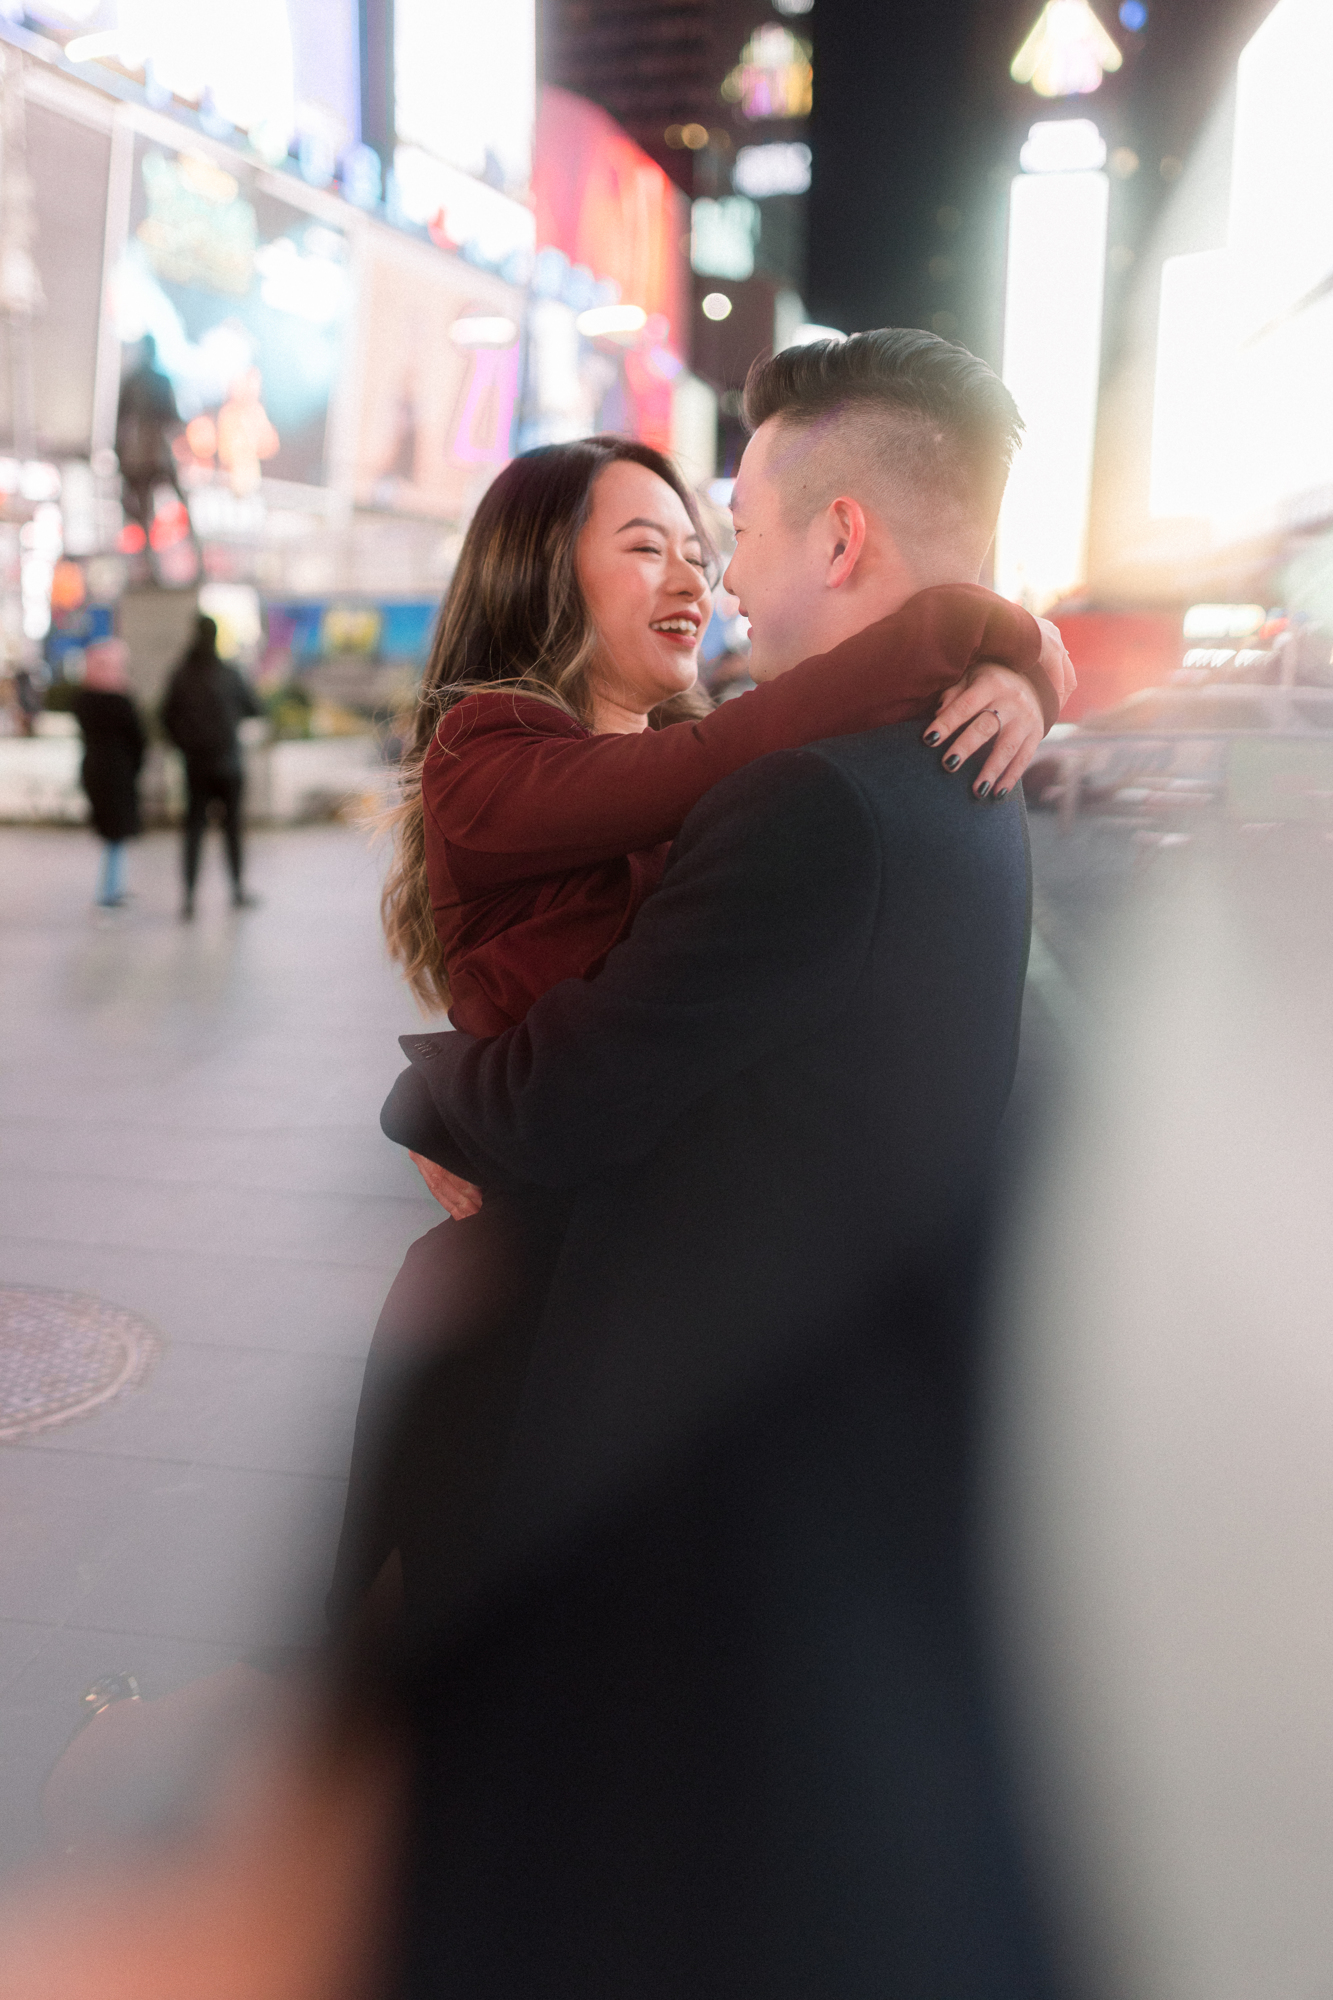 Happy Nighttime Winter Engagement Photos in New York's Iconic Times Square